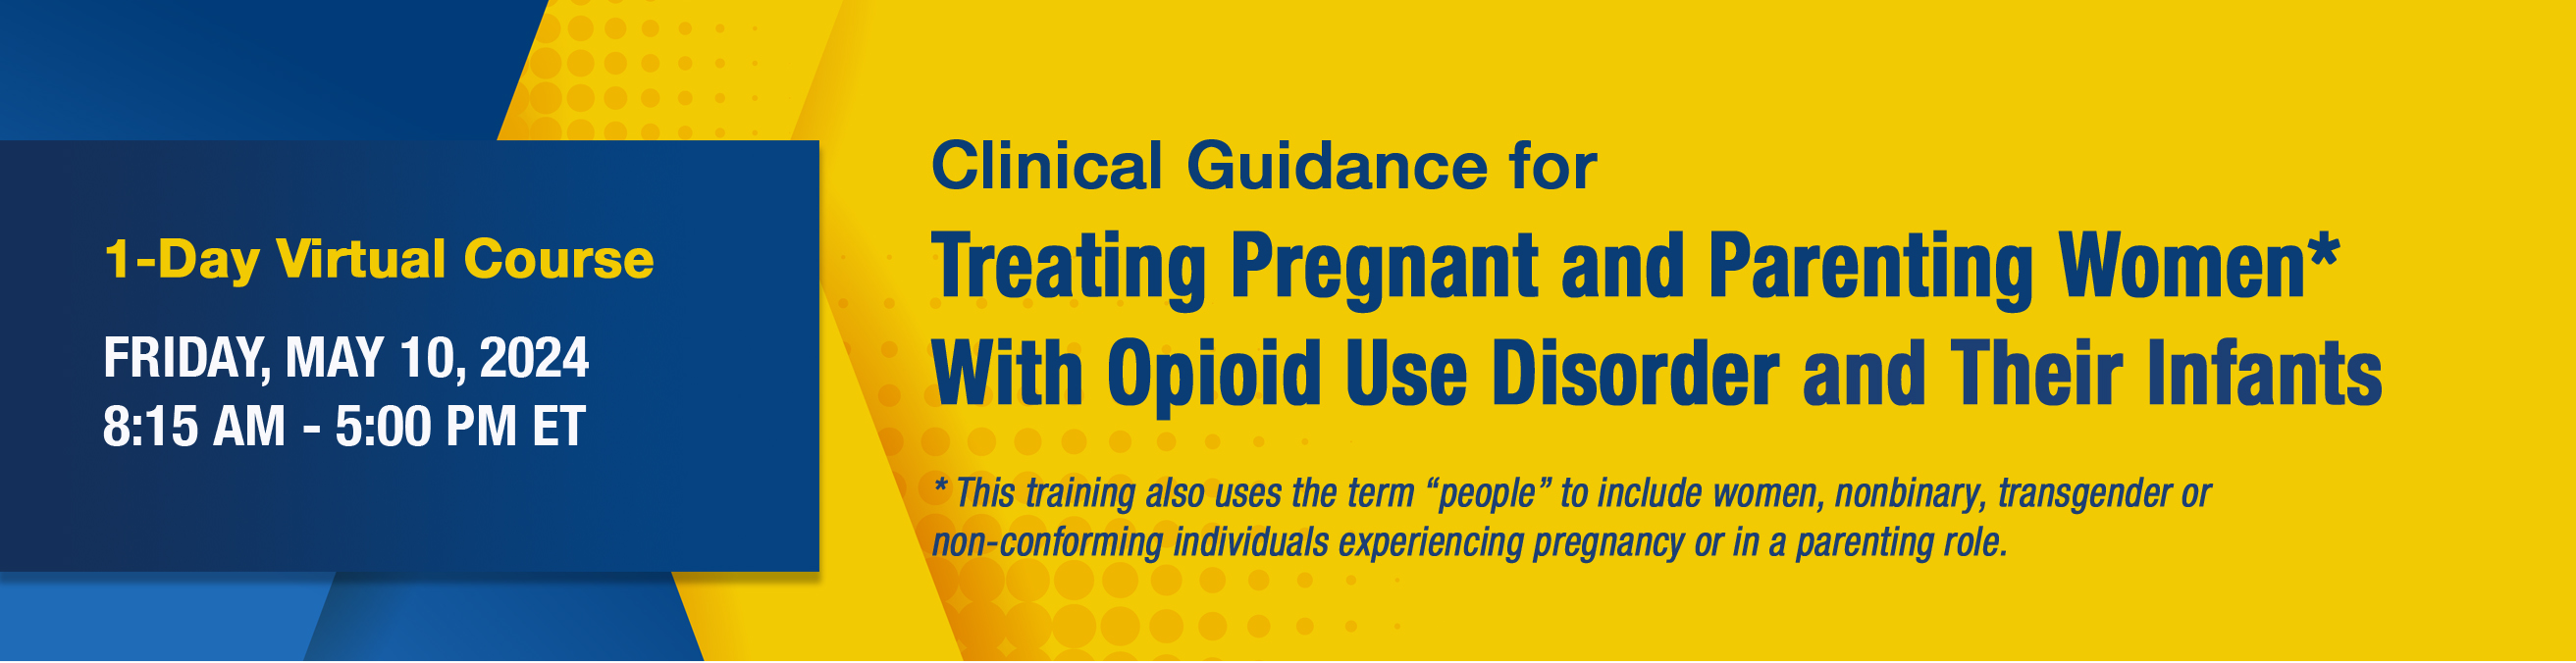 Clinical Guidance Training for Treating Pregnant & Parenting Women With Opioid Use Disorder & Their Infants May 10,  2024